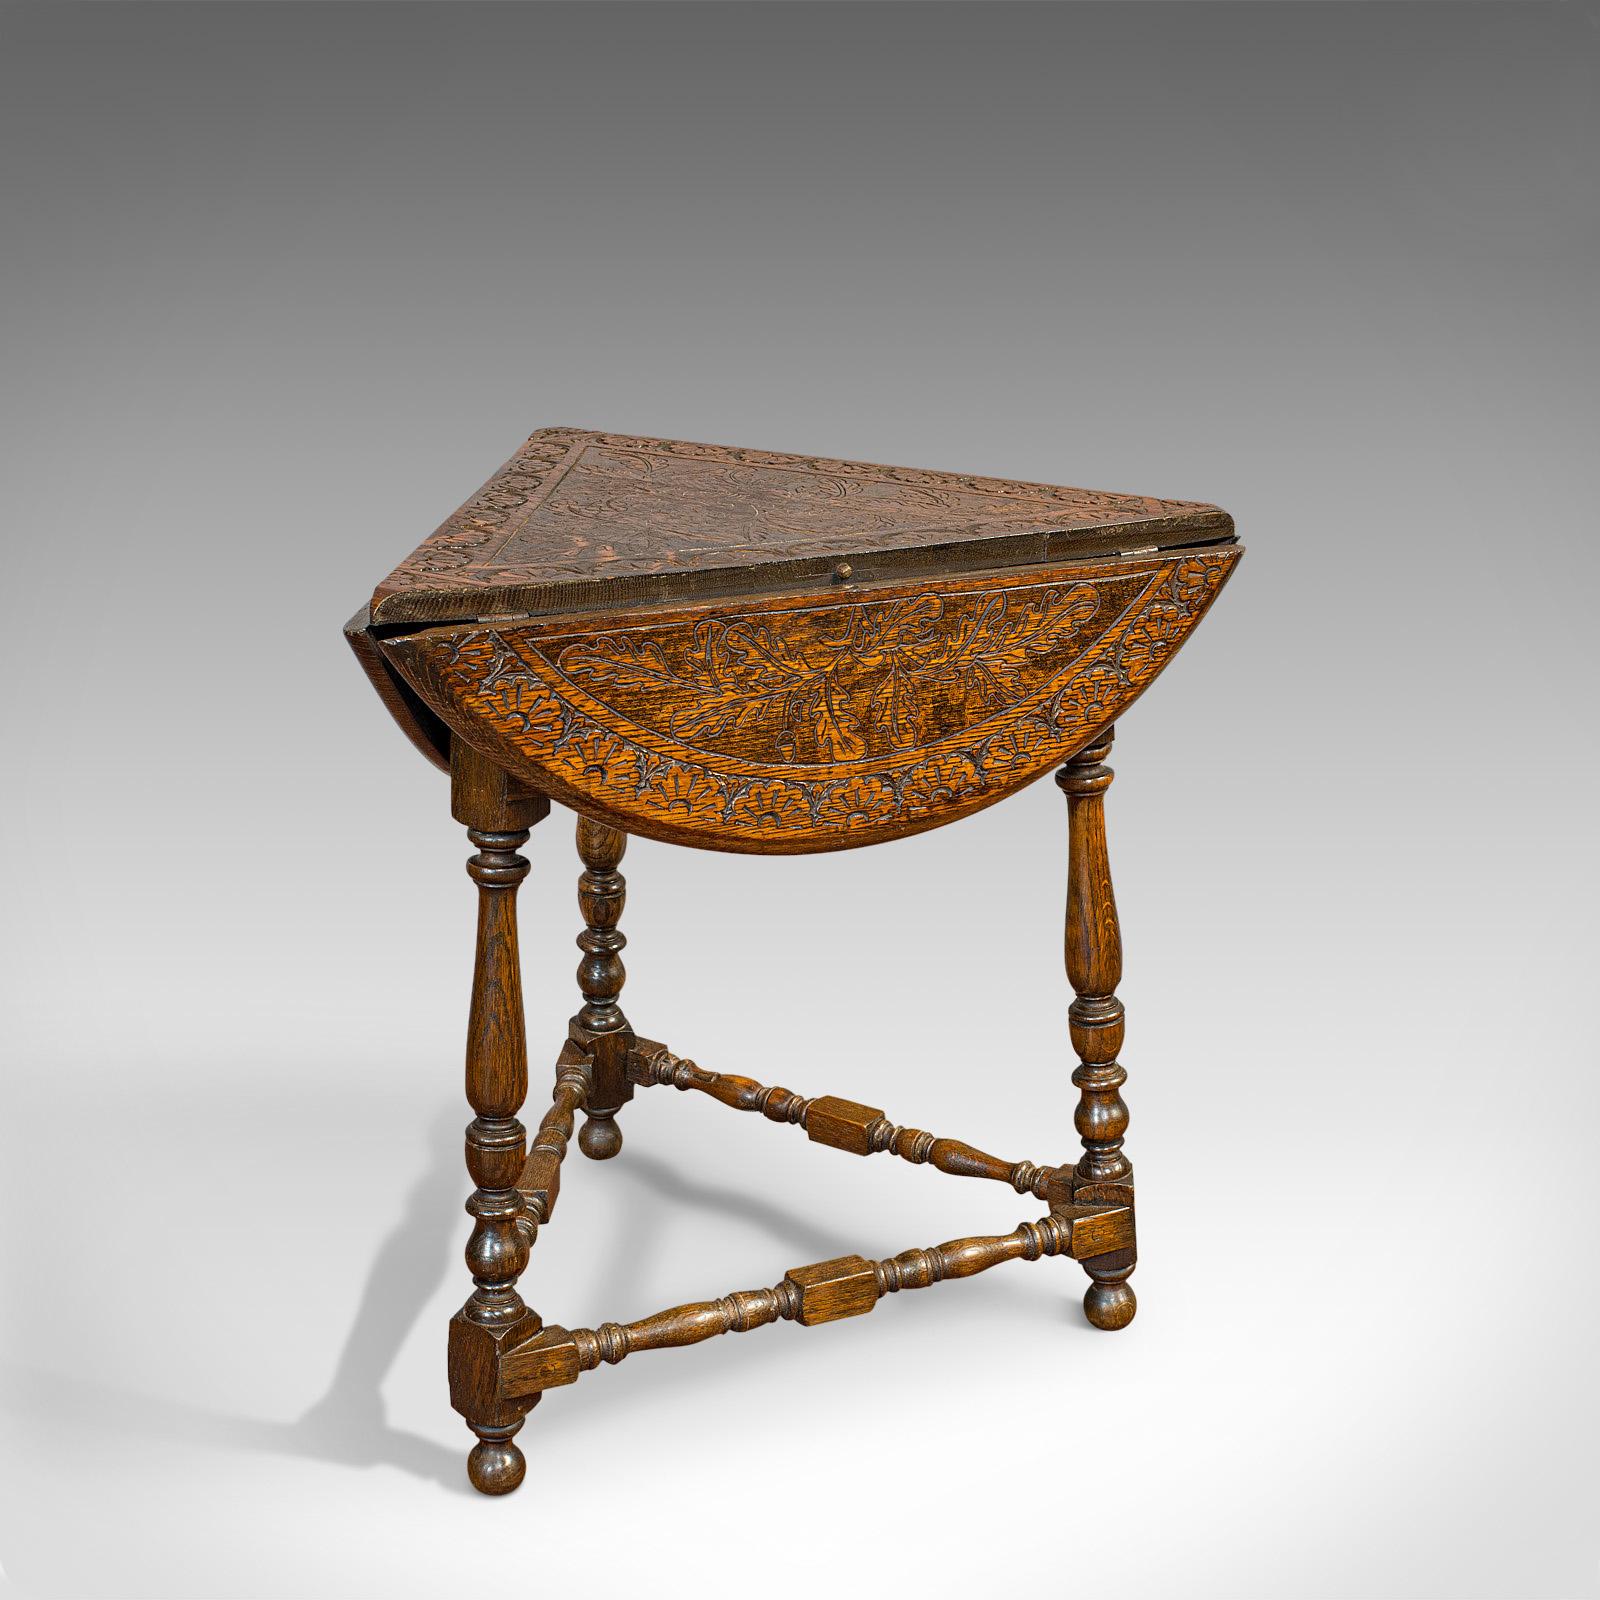 This is an antique cricket table. An English, oak drop-leaf lamp or occasional table, dating to the Edwardian period, circa 1910.

Fascinating rotary table top
Displays a desirable aged patina
Select oak shows fine grain interest
Caramel hues